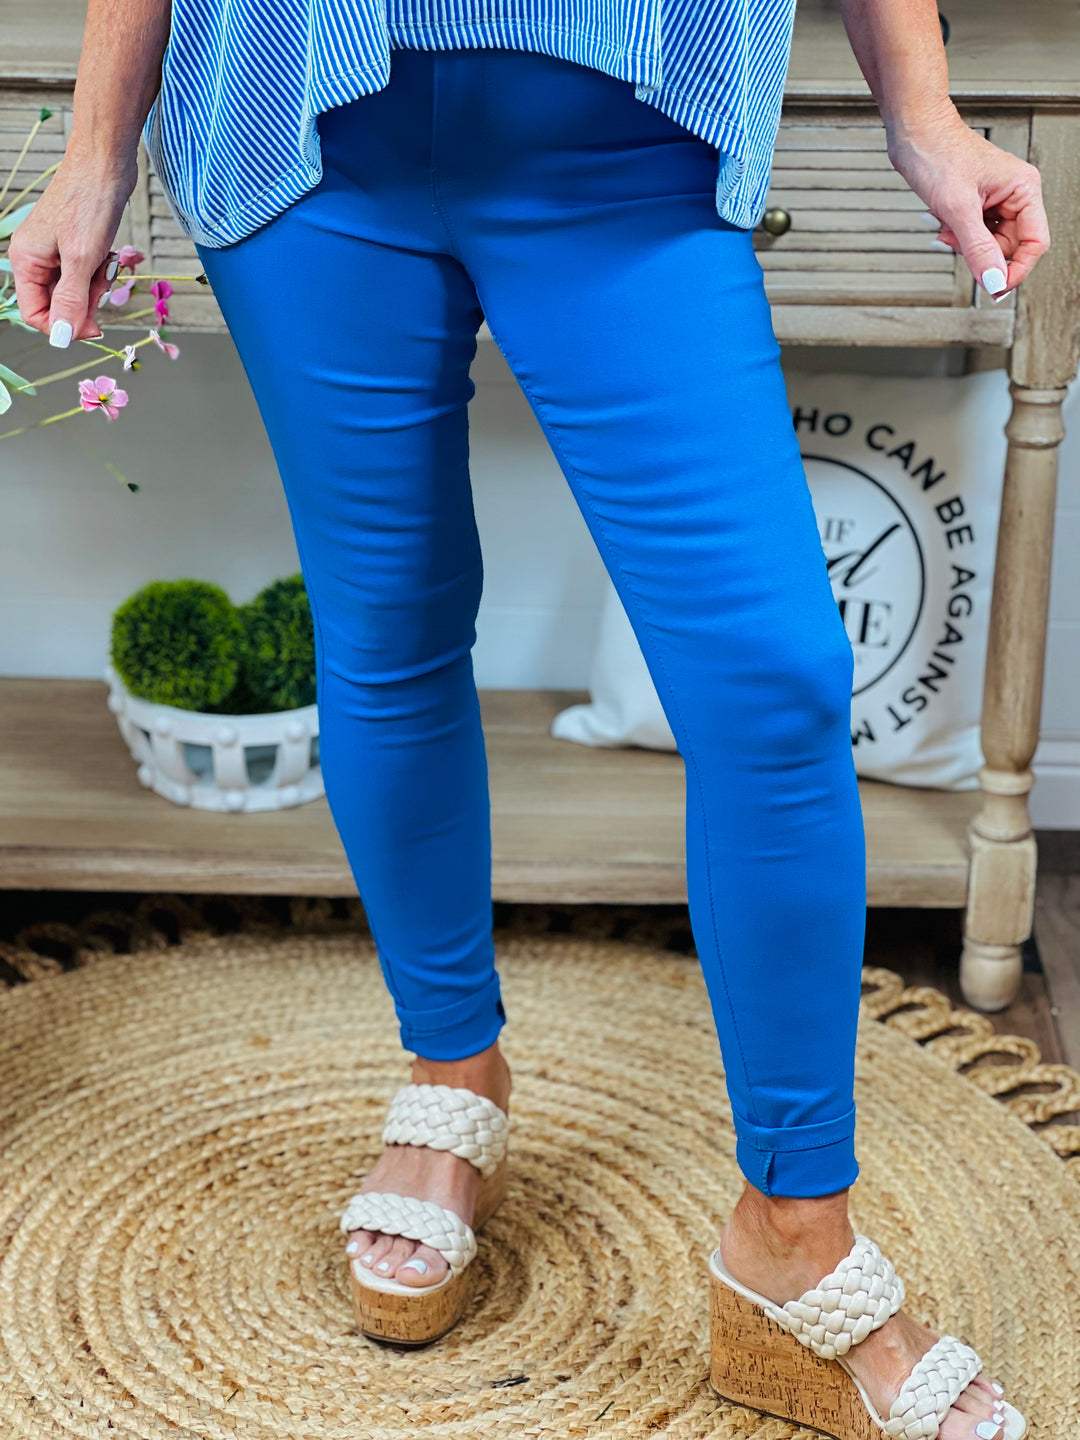 Hyperstretch Forever Color Mid-Rise Skinny Jean - 5 Color Options - Available Through Extended Sizes